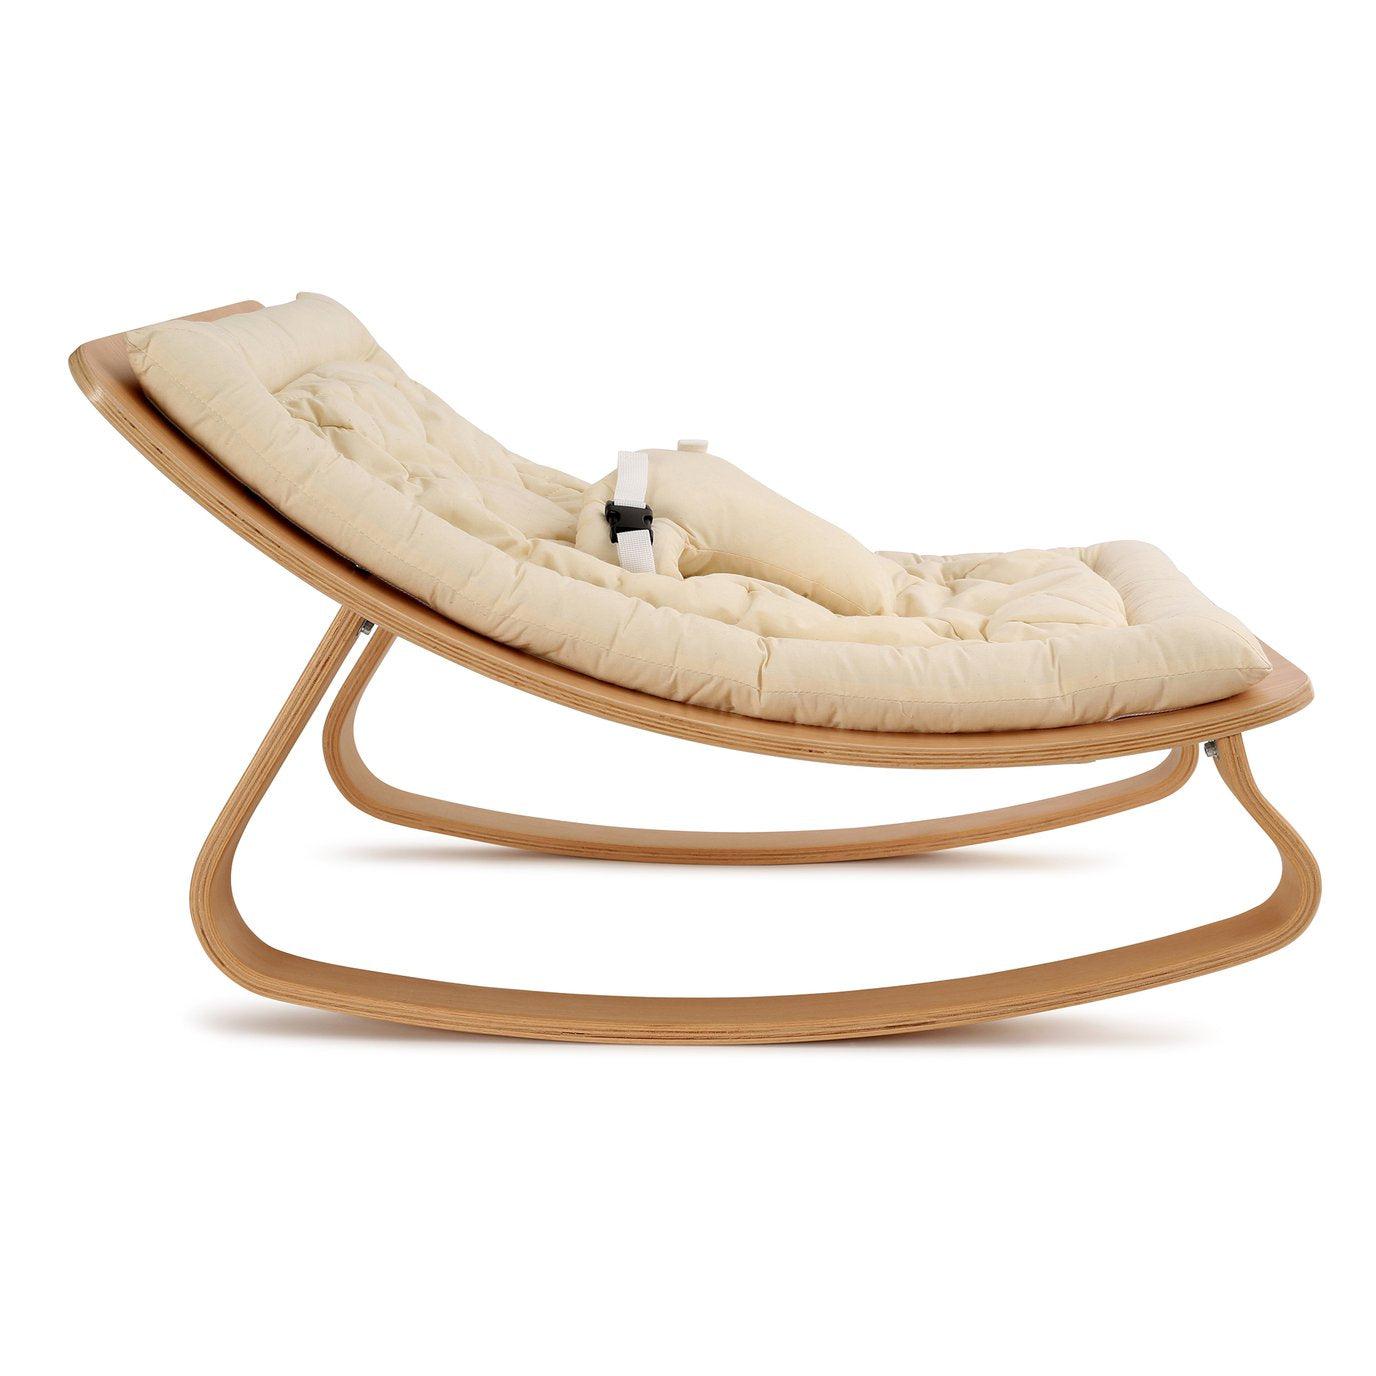 A wooden Levo Rocker by Charlie Crane with a white background.